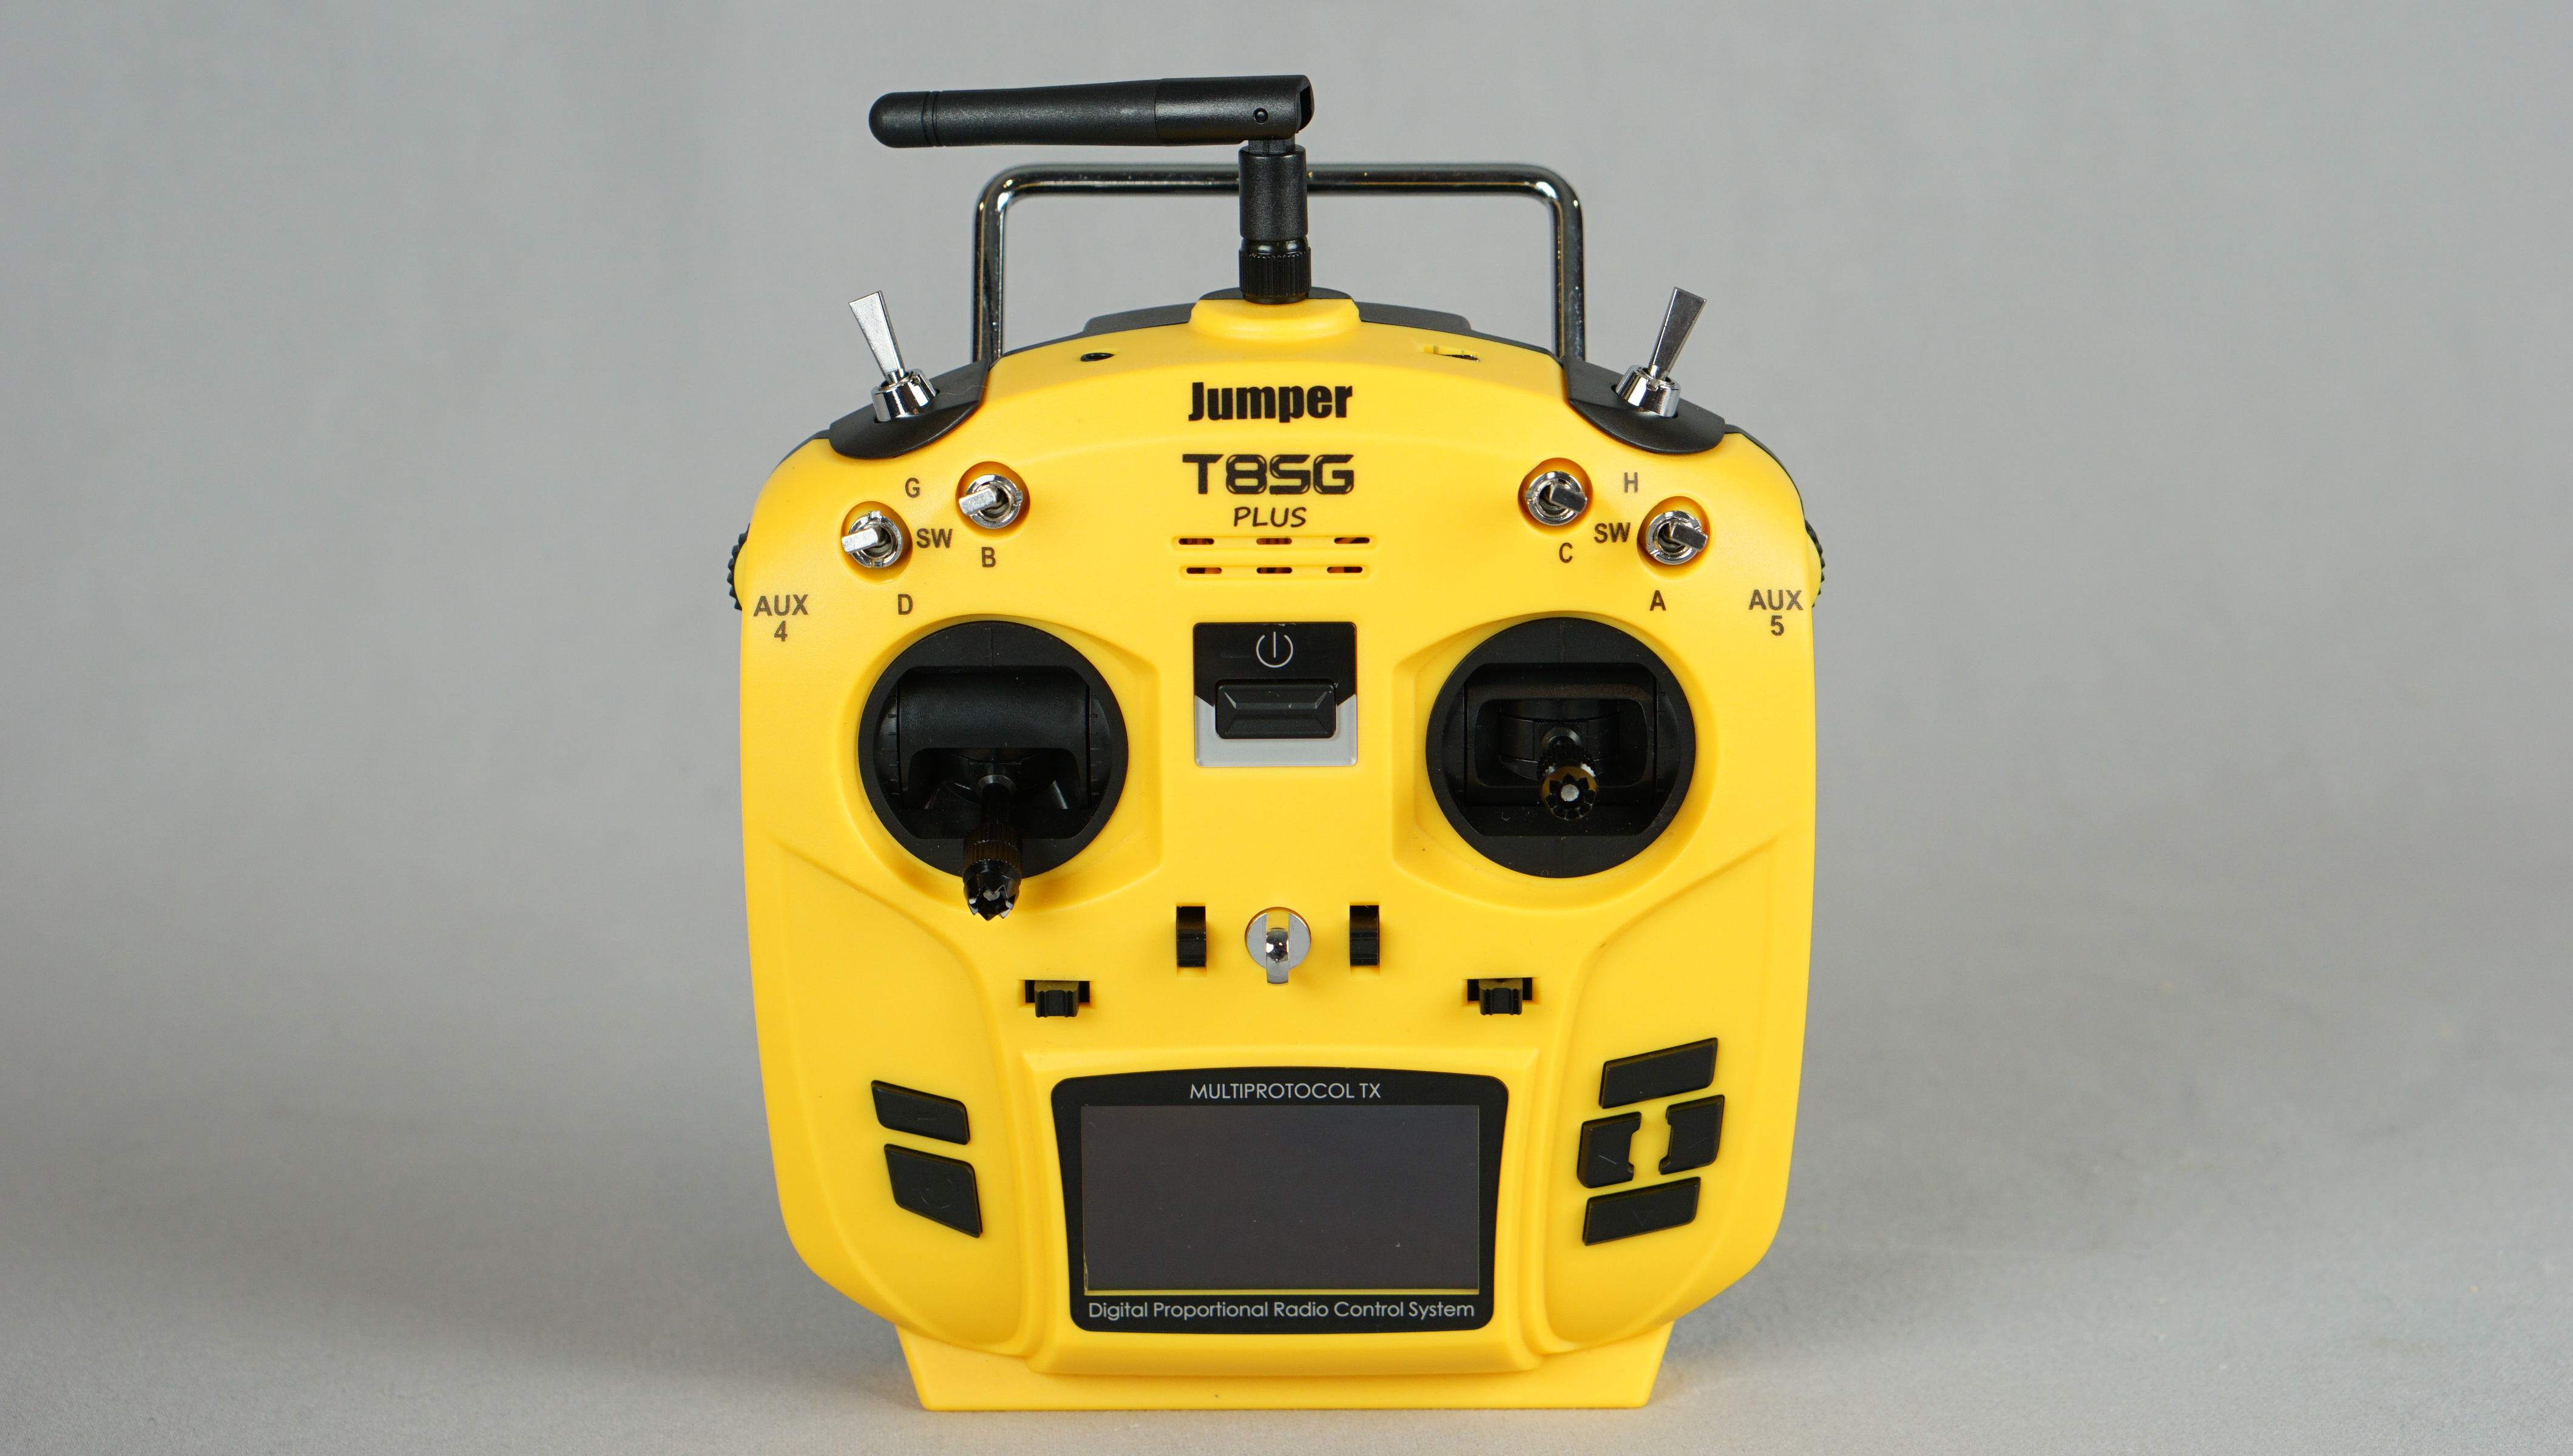 Jumper T8SG Plus: The Newest and Best Multiprotocol Transmitter